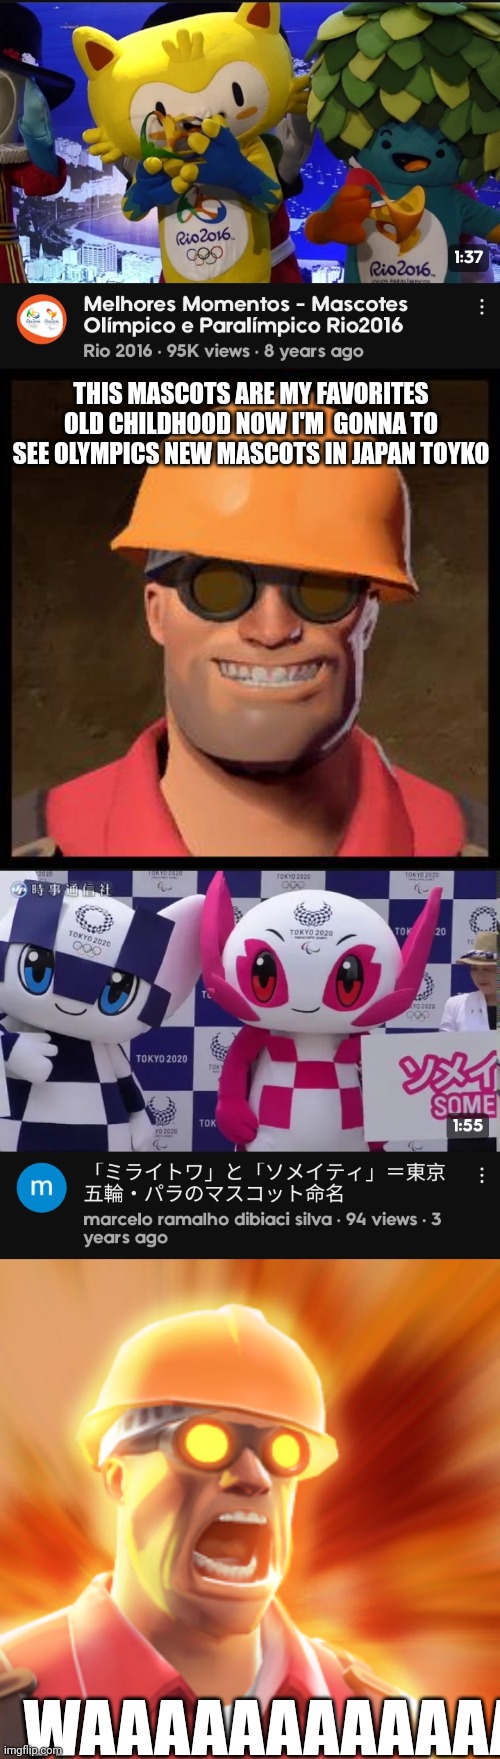 Engineer Look At The New Olympics Mascots In Japan Toyko | THIS MASCOTS ARE MY FAVORITES OLD CHILDHOOD NOW I'M  GONNA TO SEE OLYMPICS NEW MASCOTS IN JAPAN TOYKO; WAAAAAAAAAAAAAAAAAAA | image tagged in engineer tf2 | made w/ Imgflip meme maker